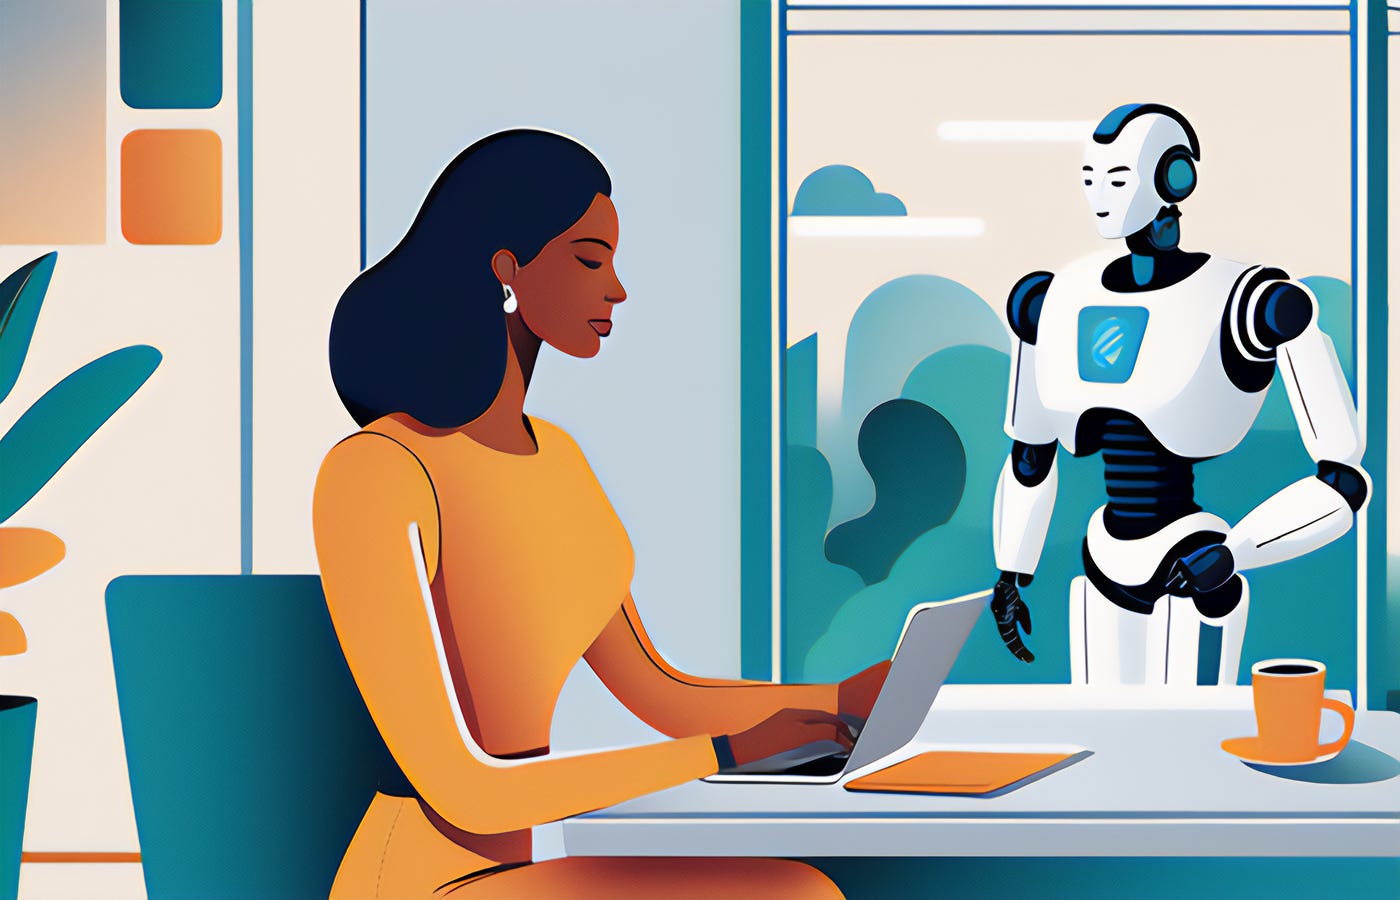 An illustration of a friendly robot standing near a woman typing on a laptop